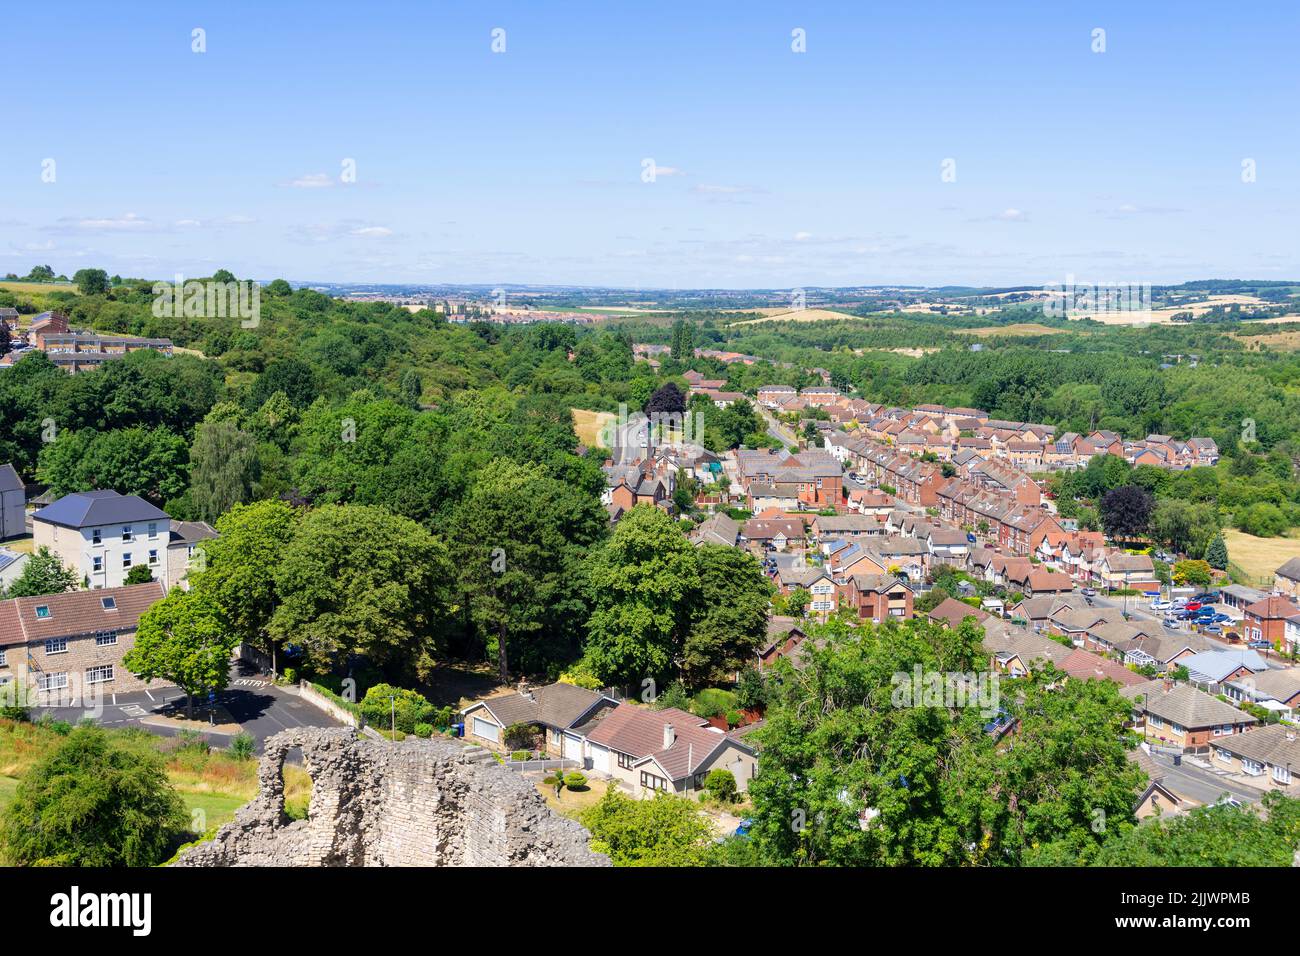 Conisbrough town aerial view South Yorkshire England Uk GB Europe Stock Photo